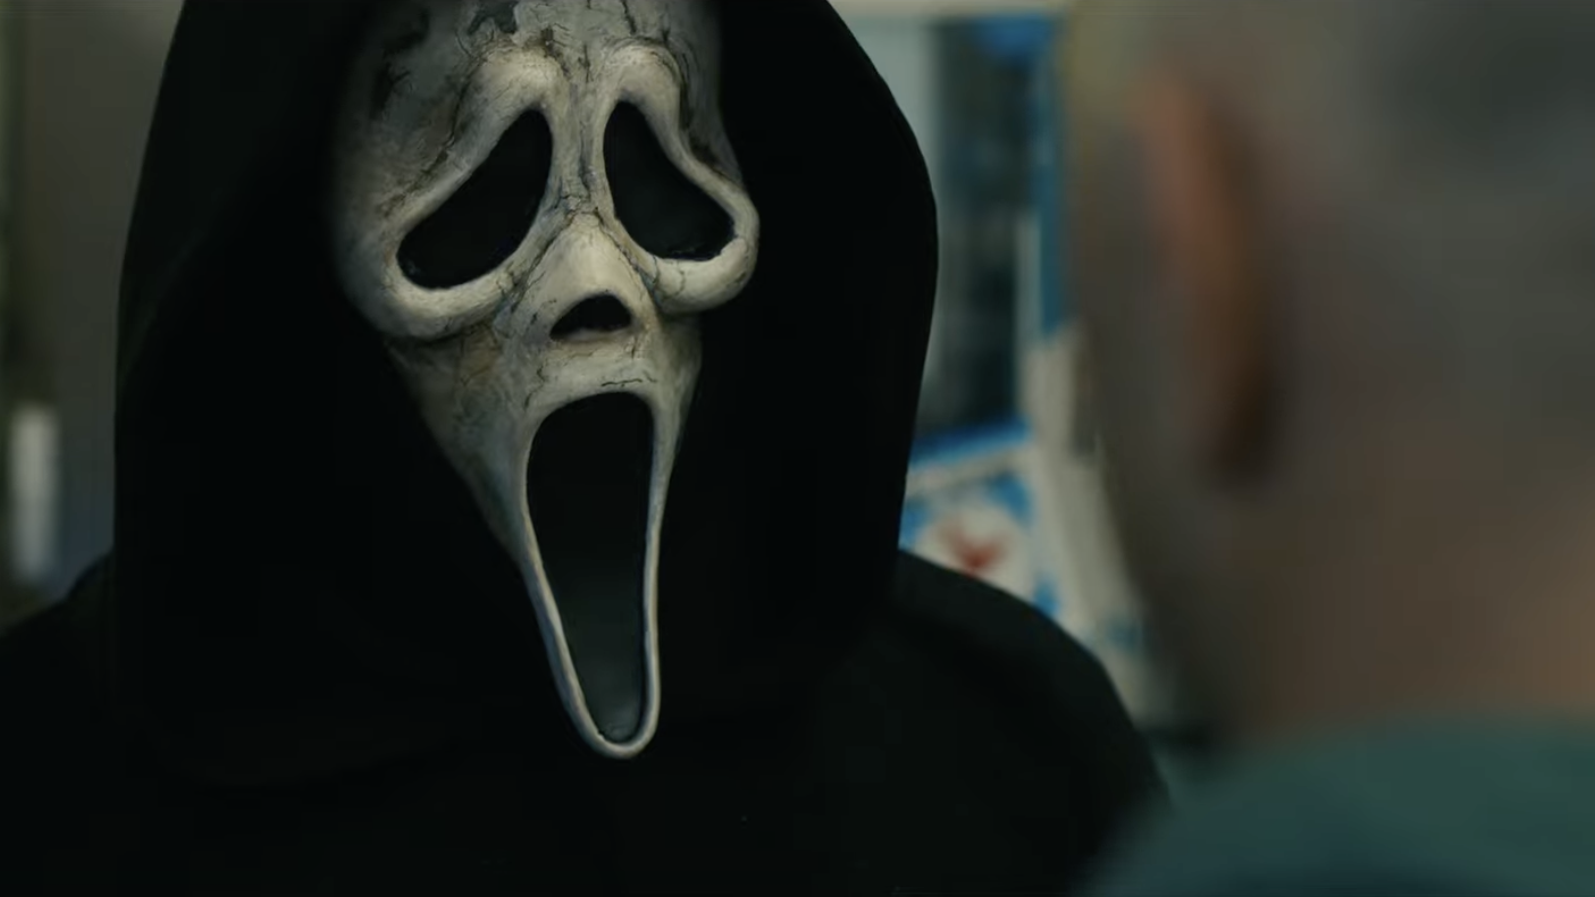 Scream 6: Trailer, release date, and cast details revealed